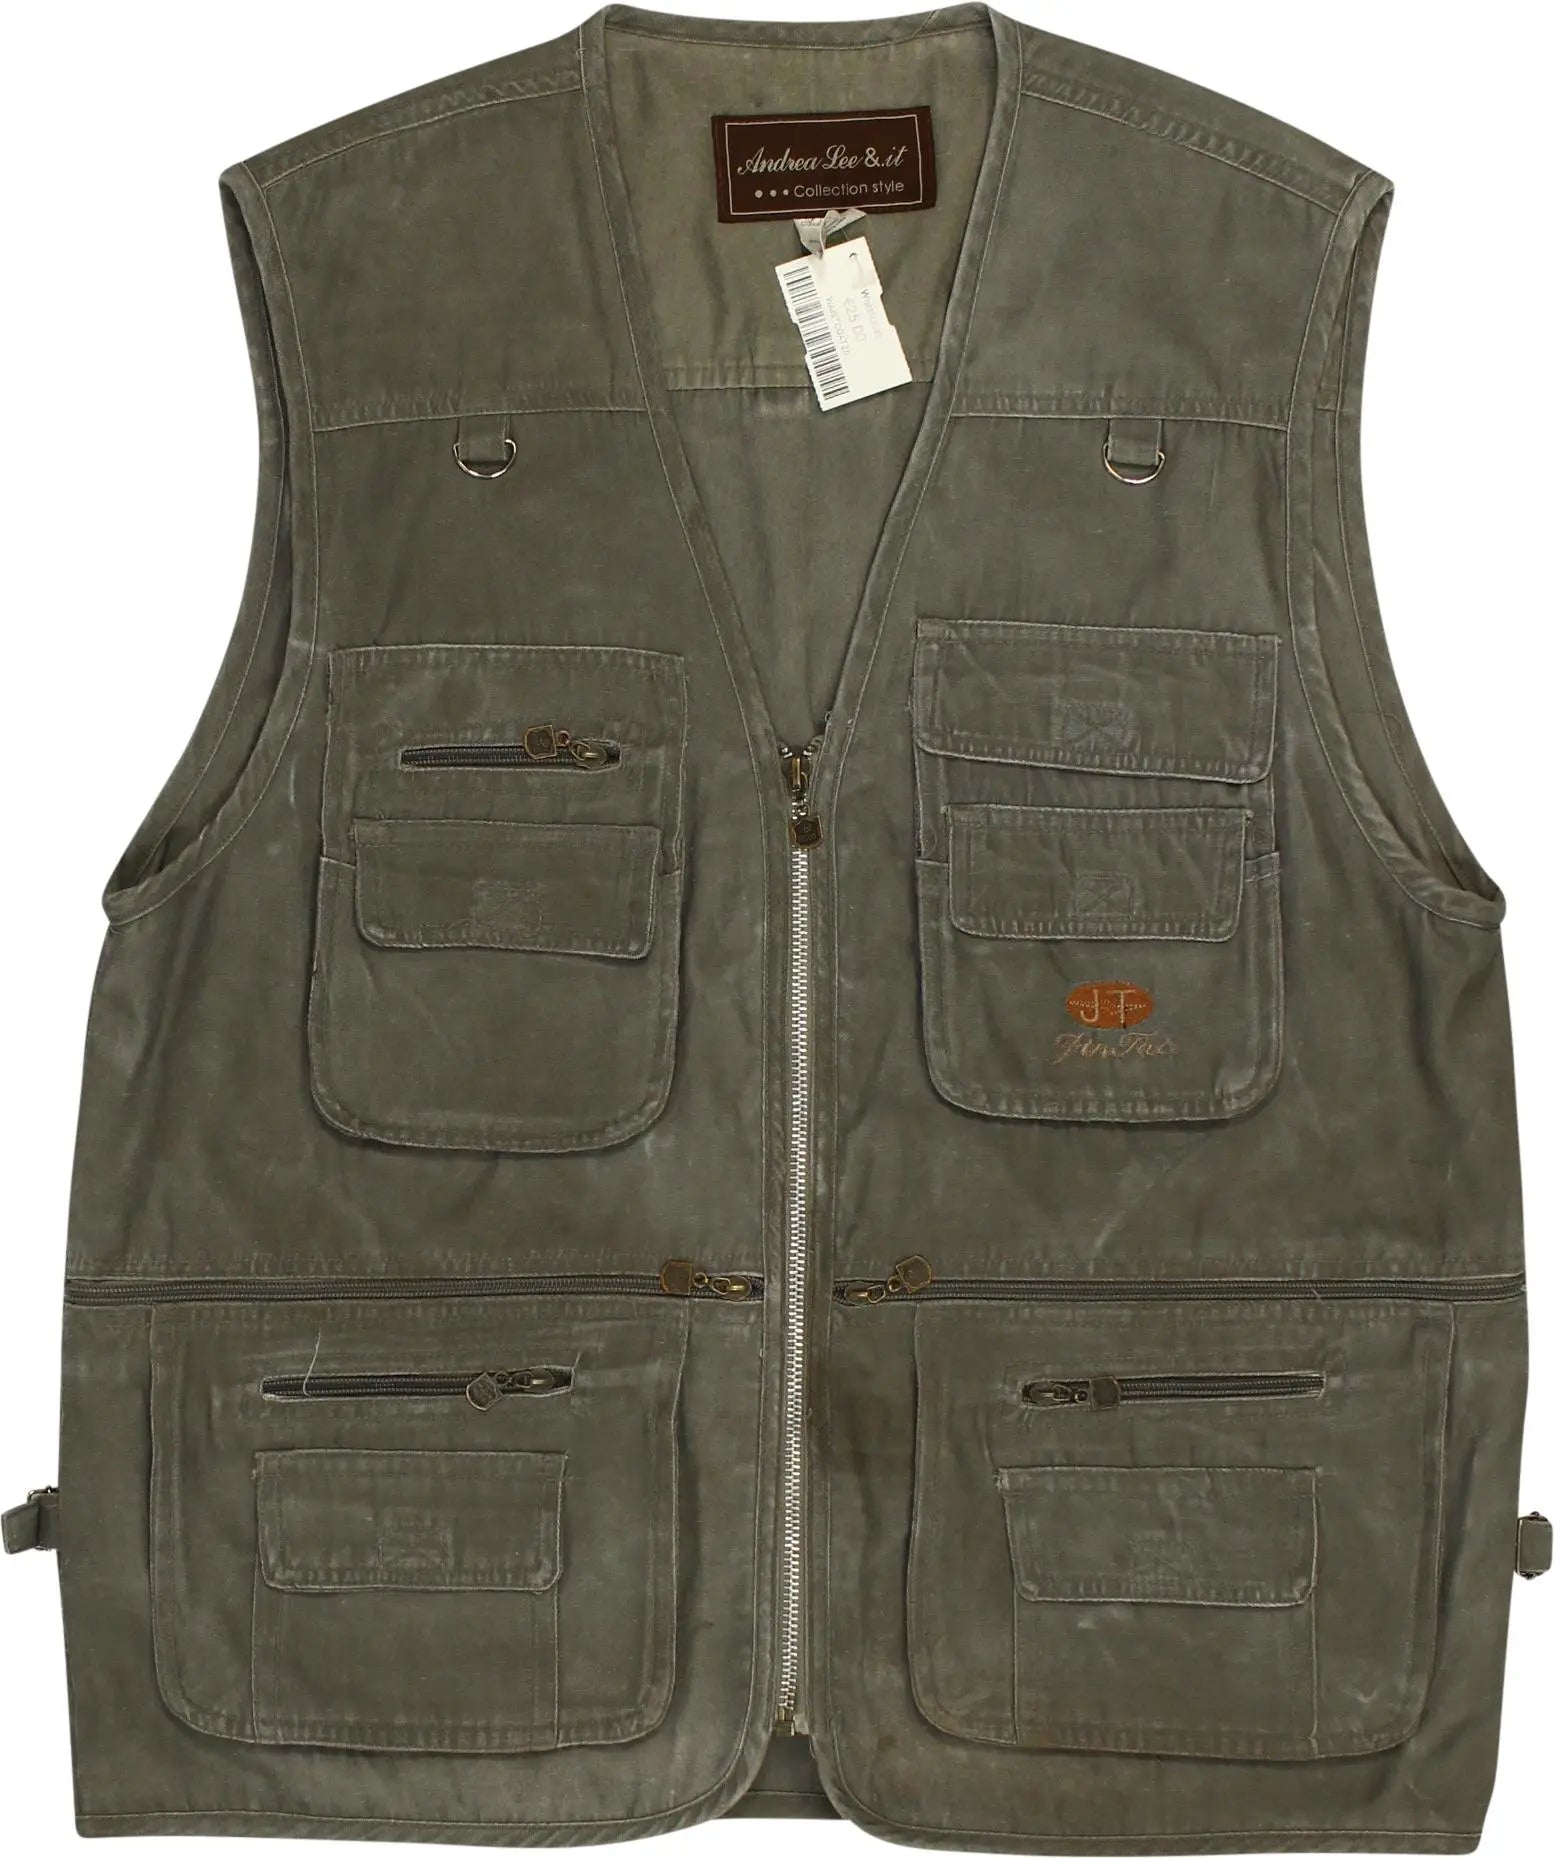 Andrea Lee & it - Waistcoat- ThriftTale.com - Vintage and second handclothing